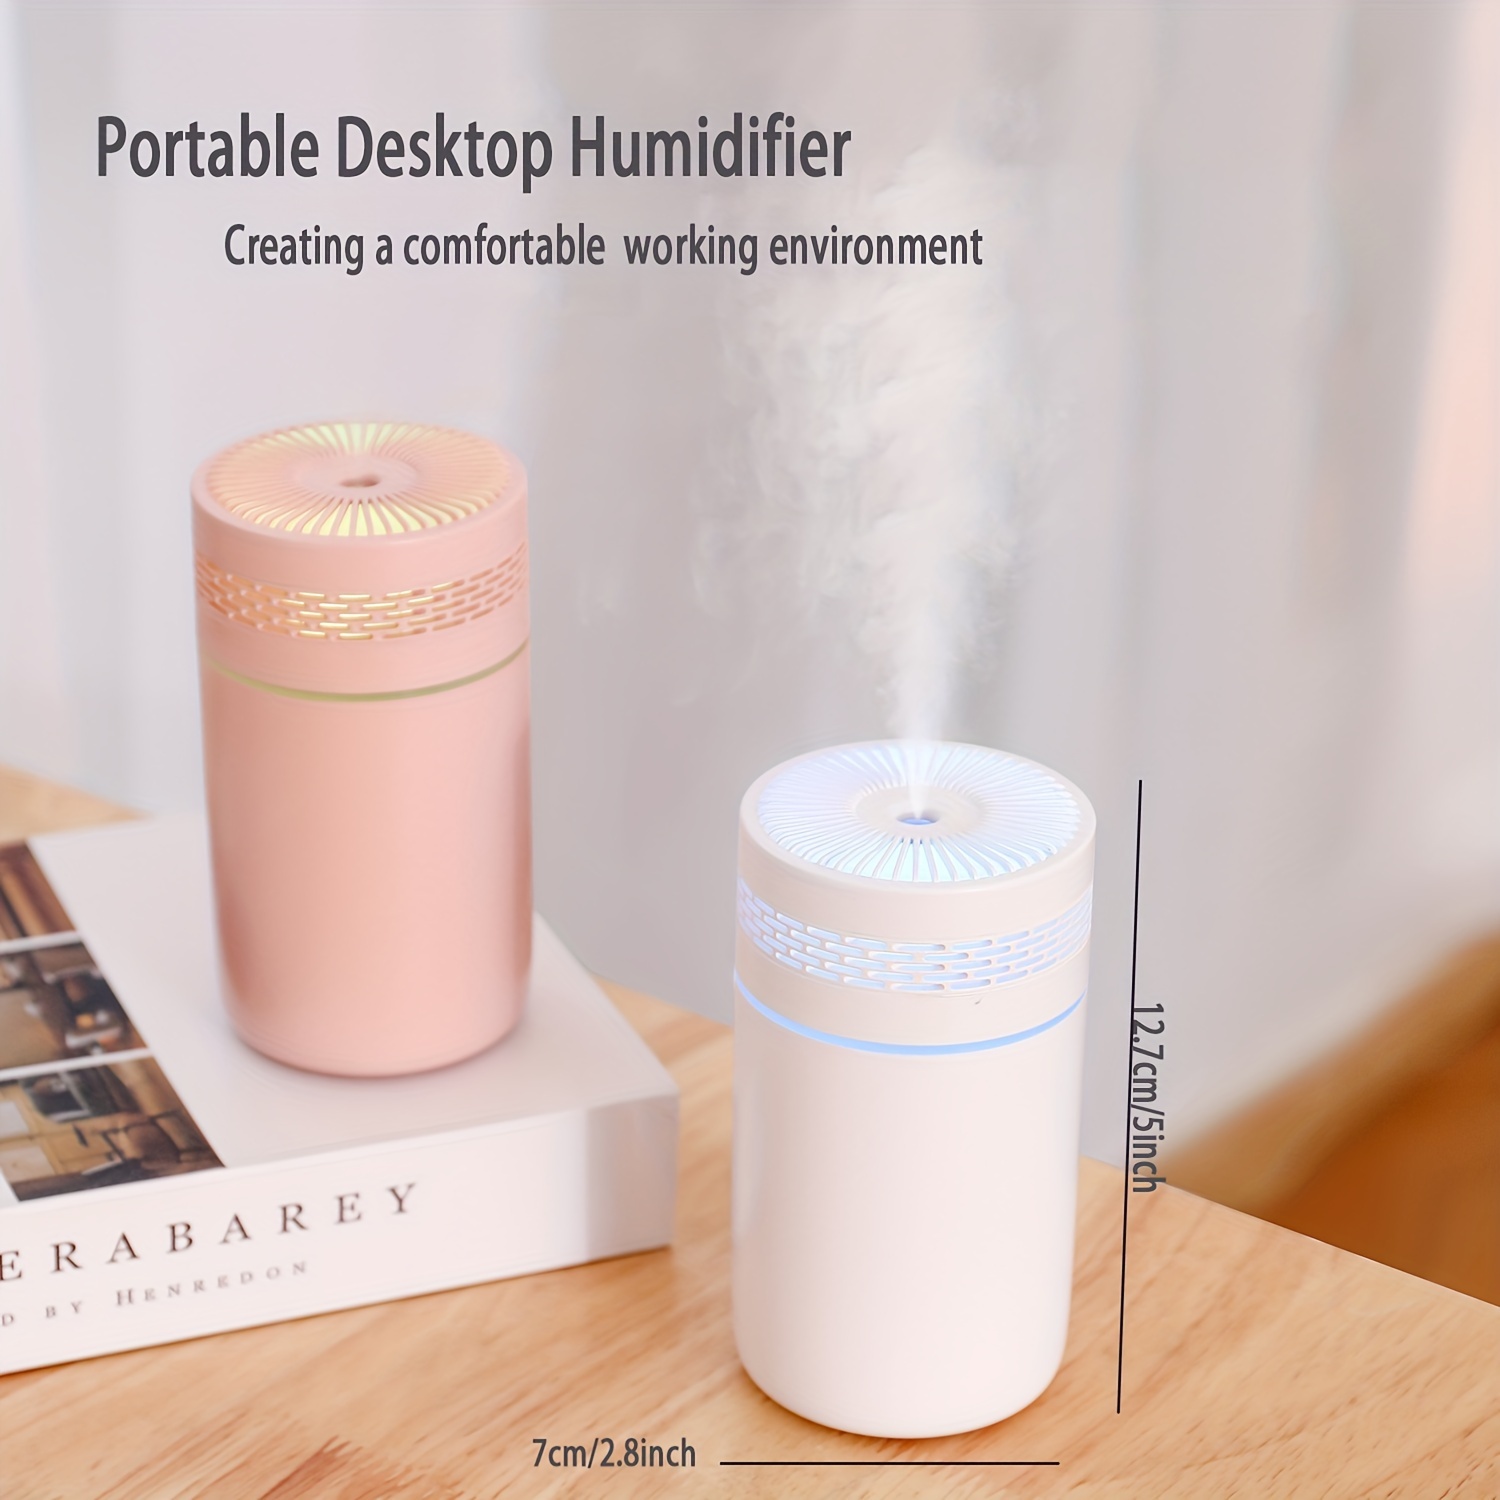 

1pc Portable Cool Mini Humidifier, Usb Desktop Cool Mist Air Humidifier For Car, Office Room, Bedroom, 2 Mist Modes & Auto Shut-off